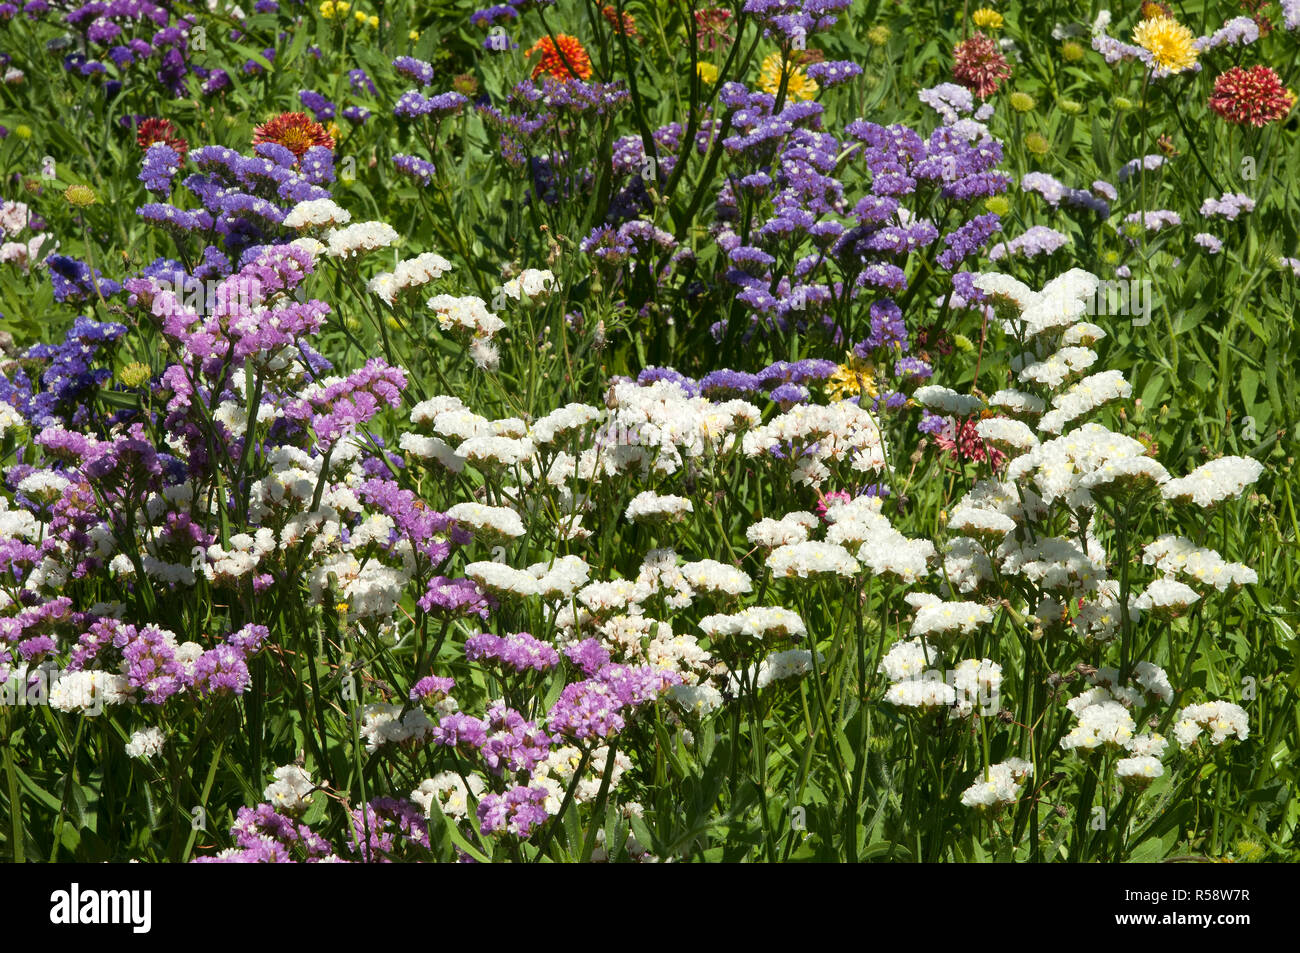 Sydney Australia, field of purple, white and pink flowers of the Perez's sea lavender Stock Photo